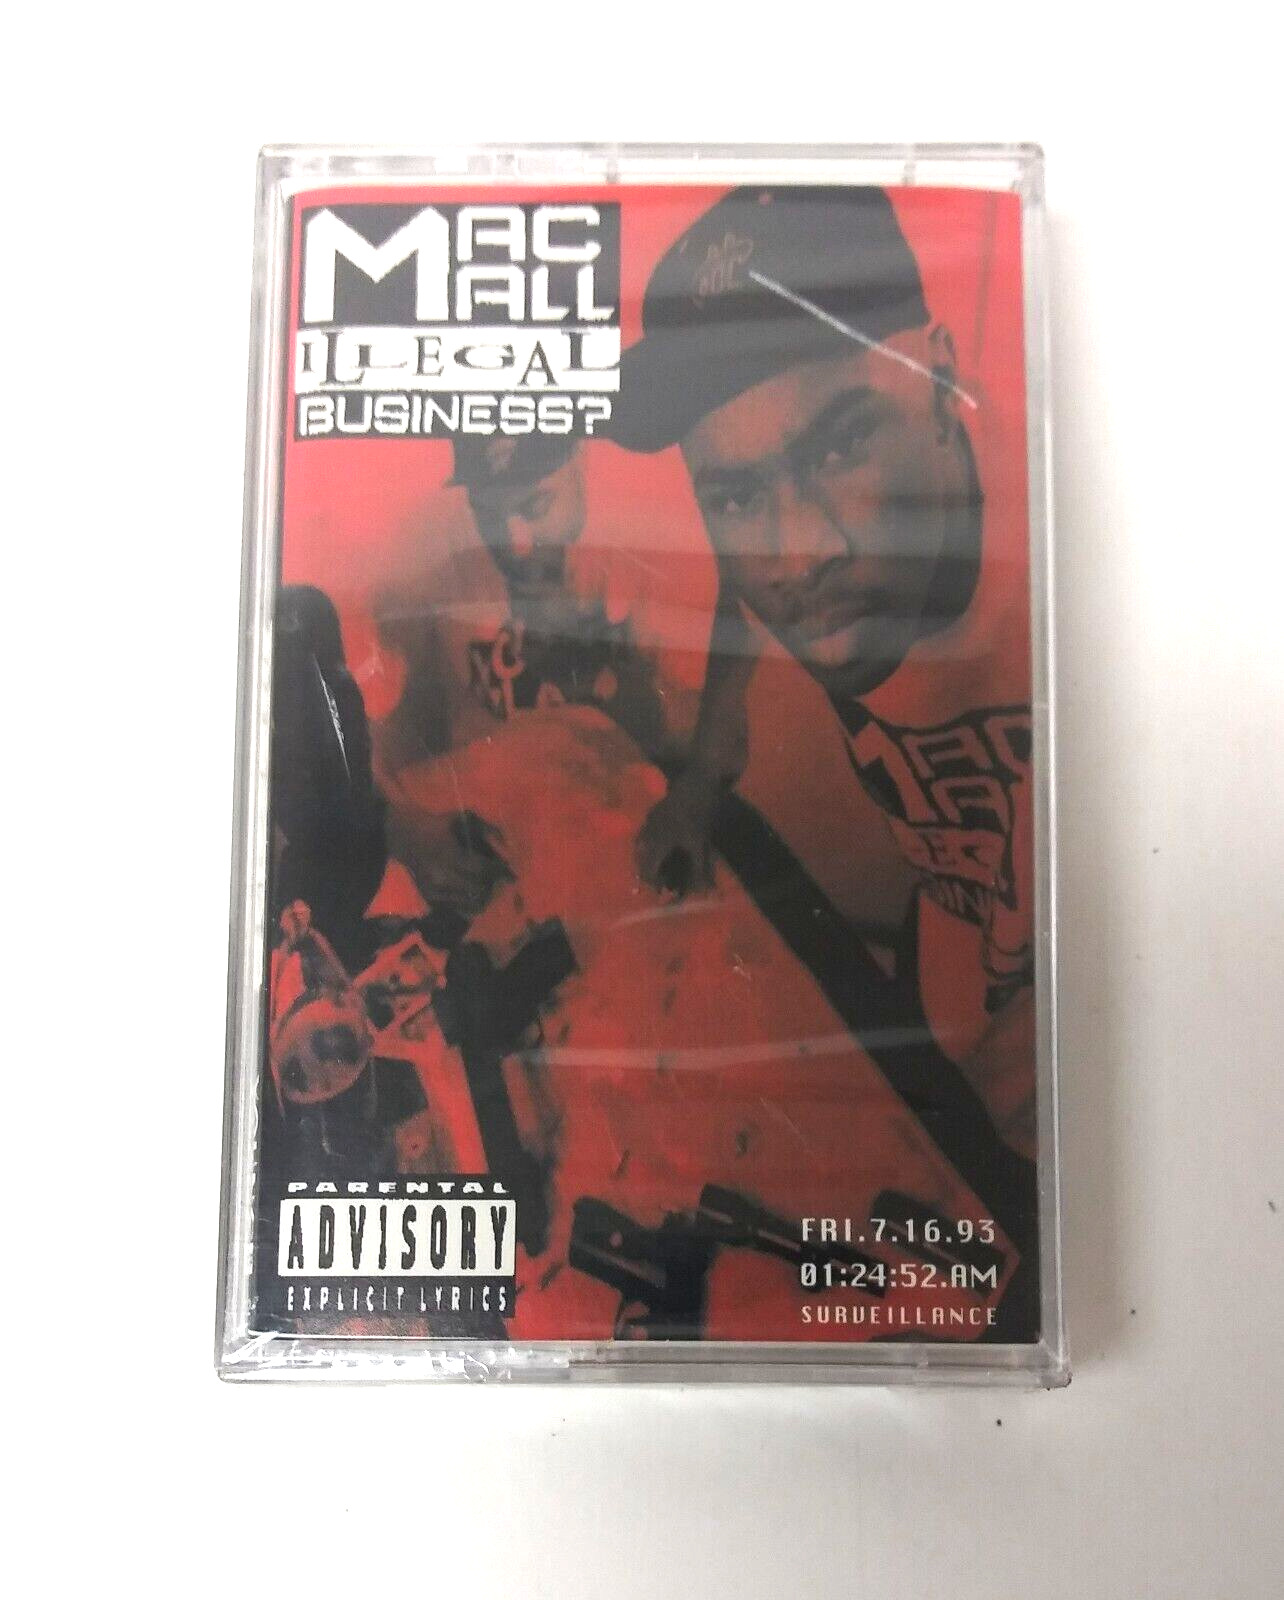 MAC MALL Illegal business Cassette LP (Young Black Brotha 1993) Rare OOP Sealed